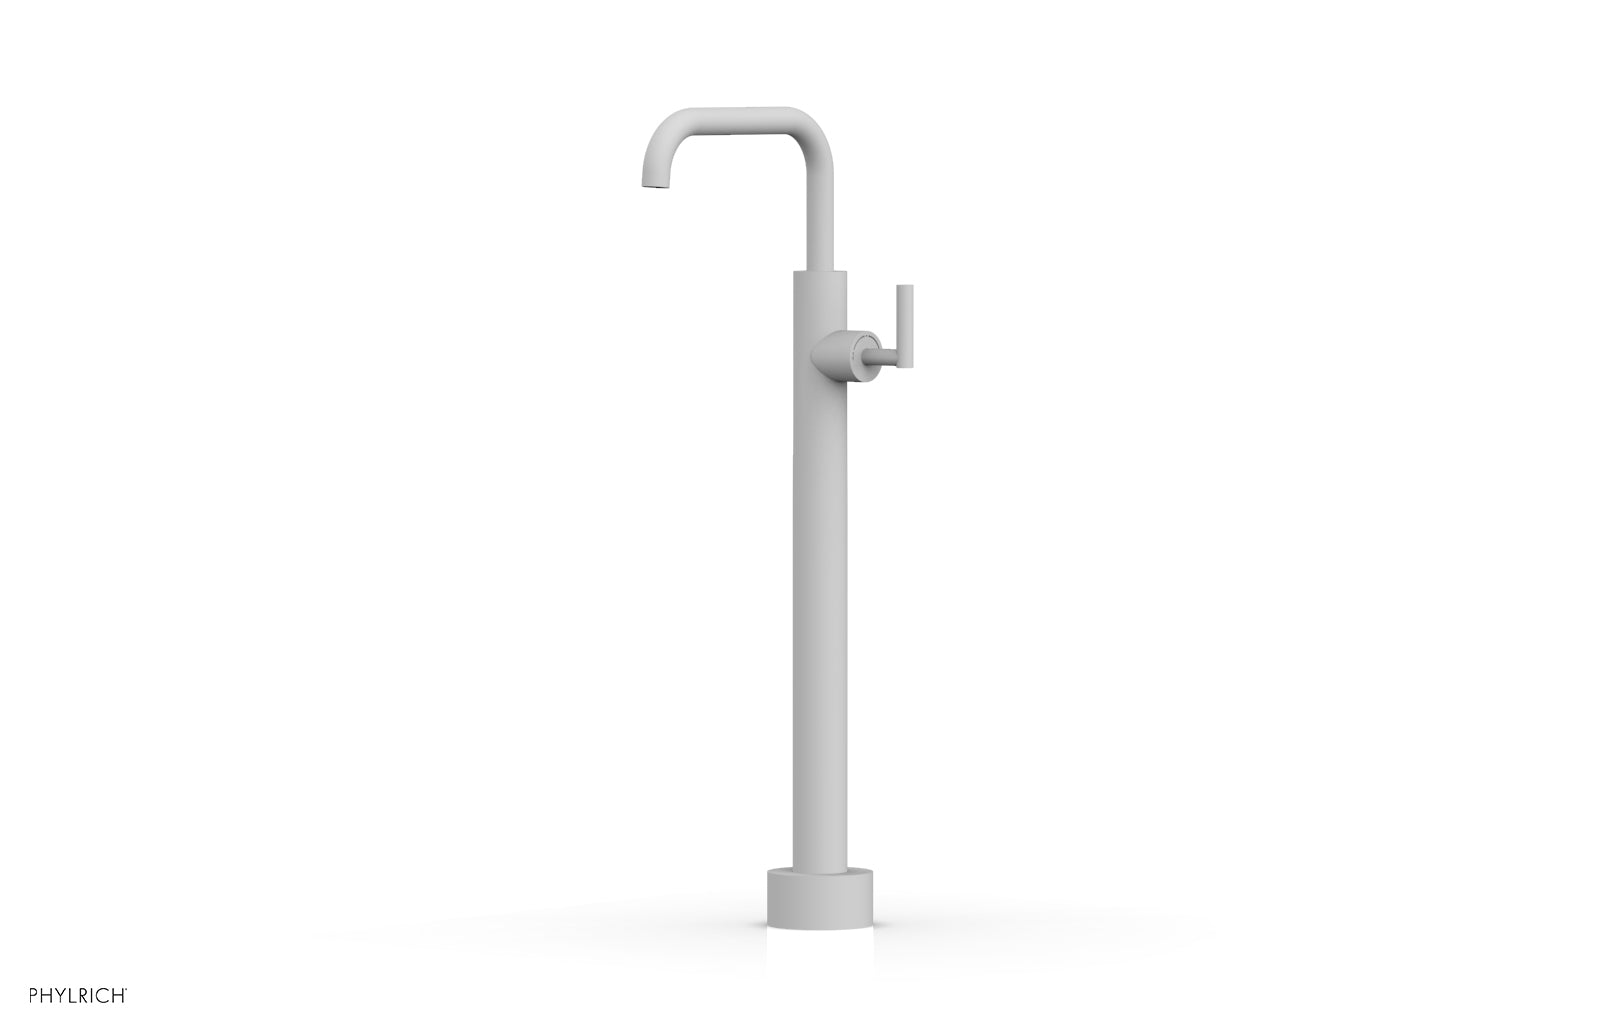 Phylrich TRANSITION Low Floor Mount Tub Filler - Lever Handle